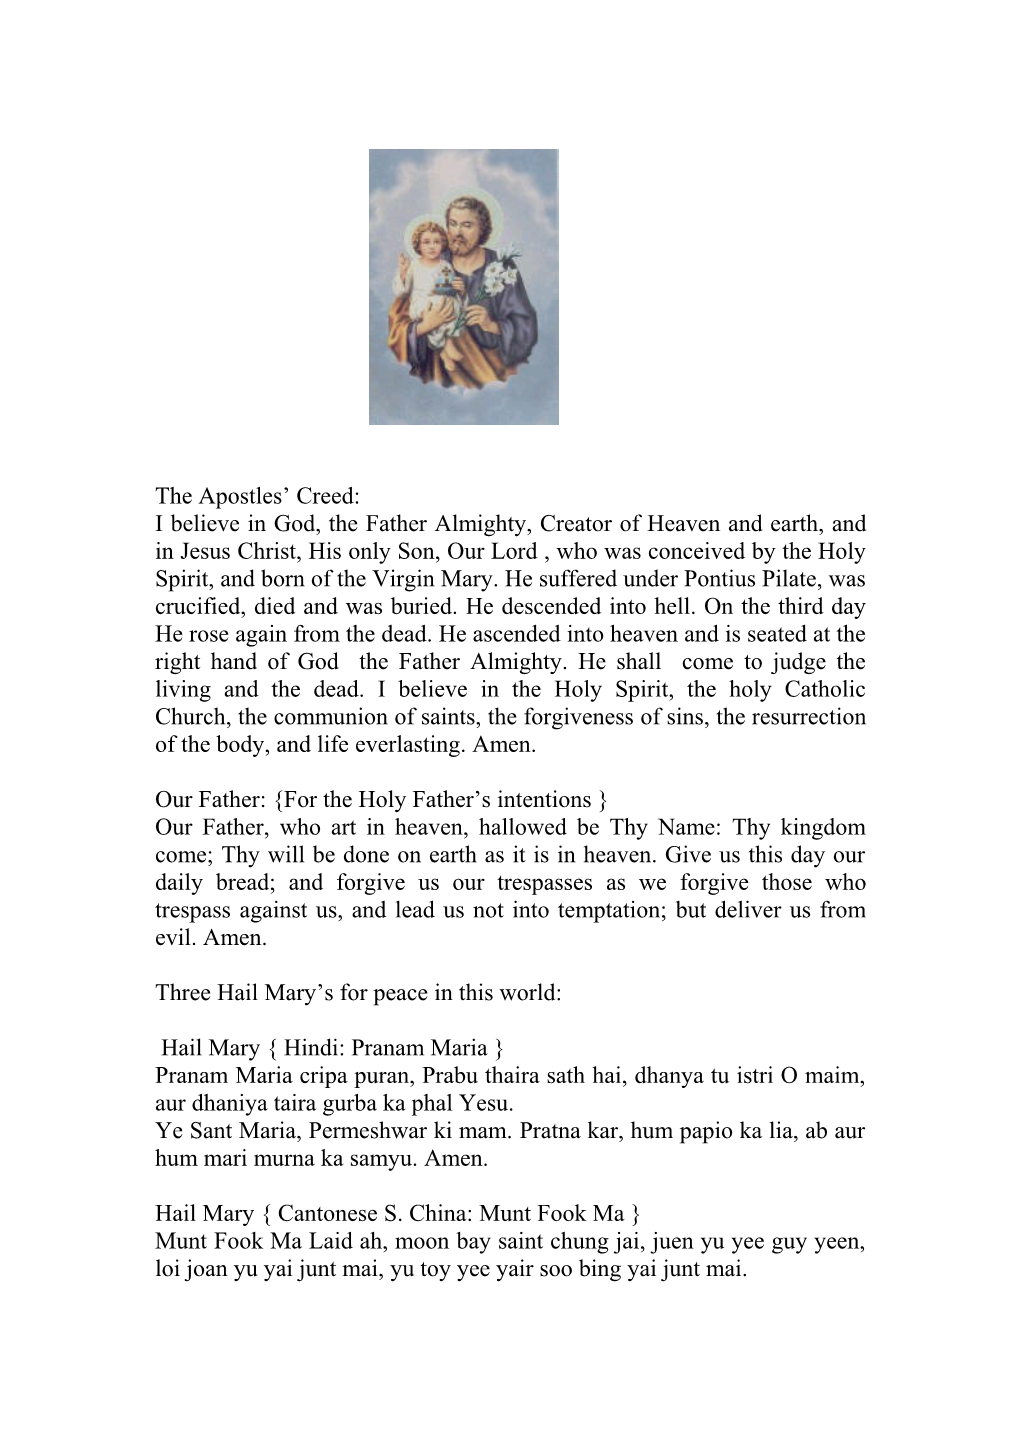 Prayers of the Peaceful Rosary